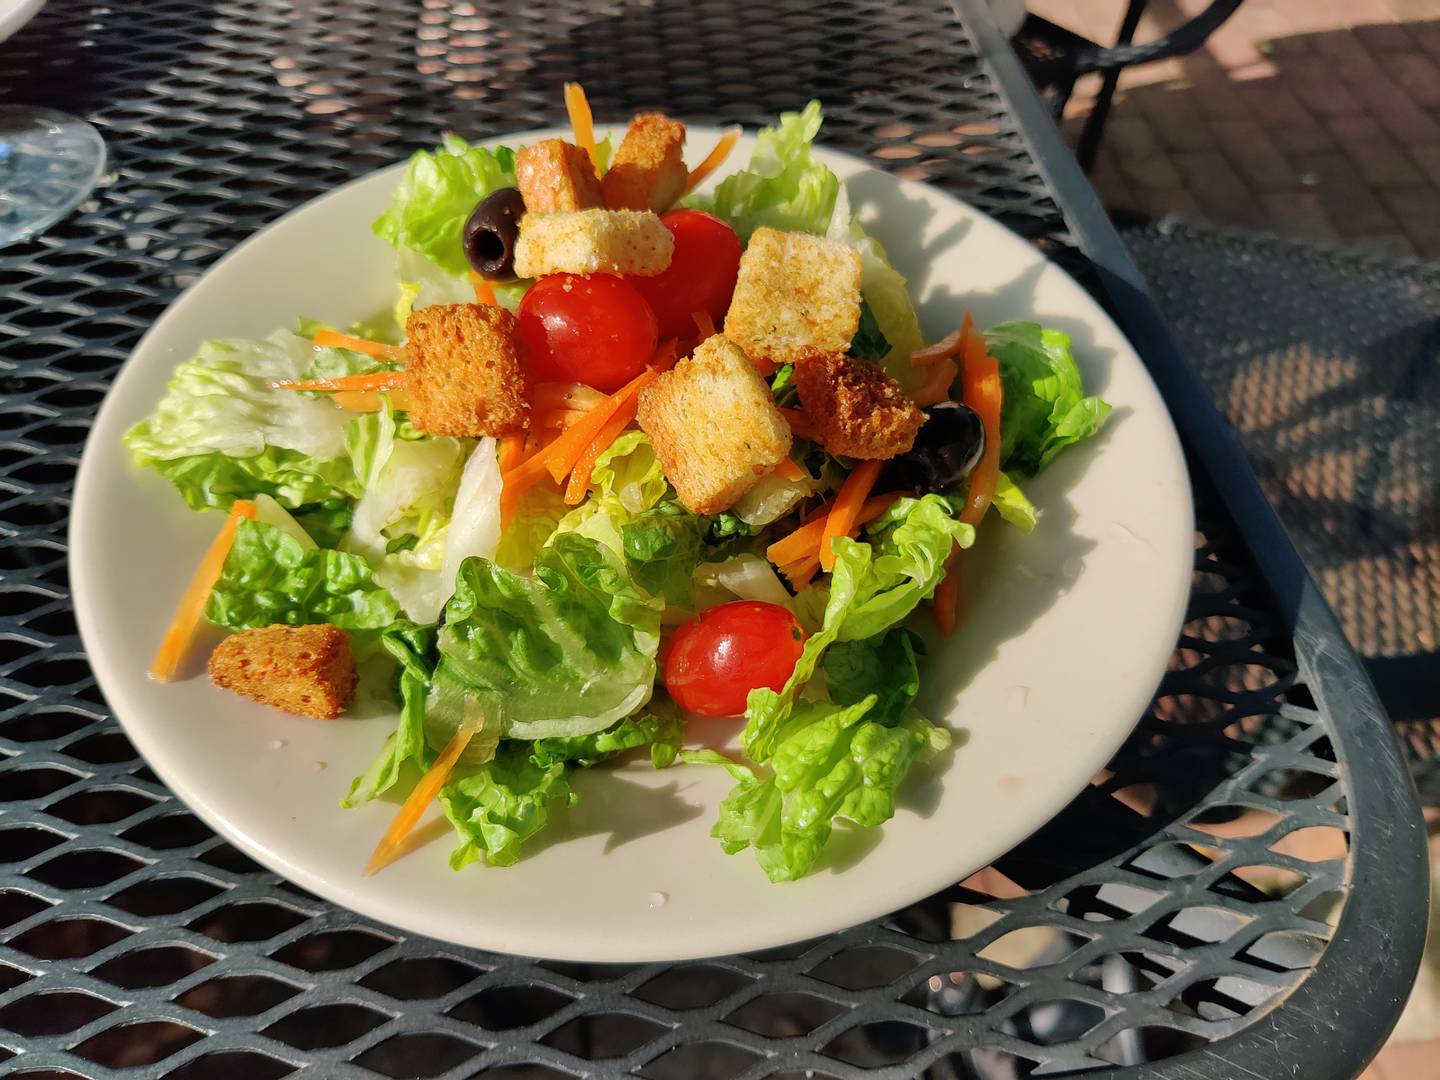 The dinner salad at Pal Joey's in downtown Batavia.